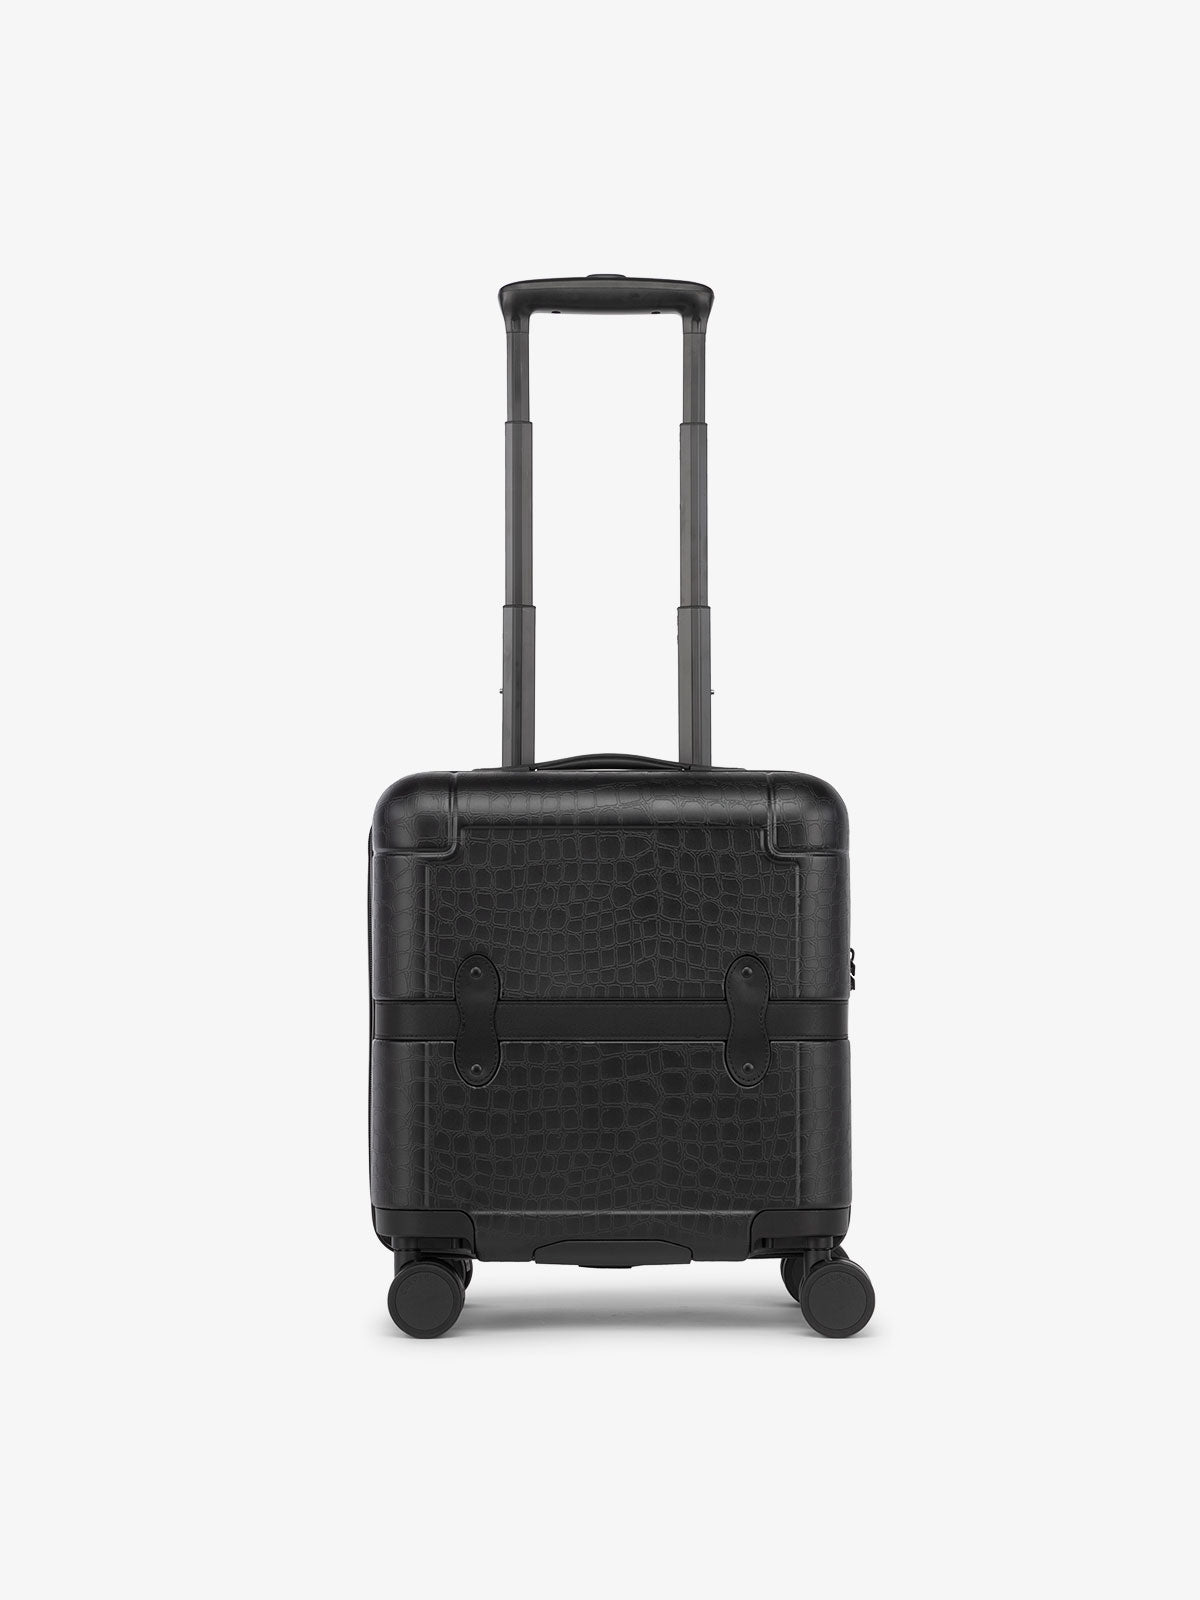 CALPAK TRNK mini carry on luggage with faux-crocodile design in black